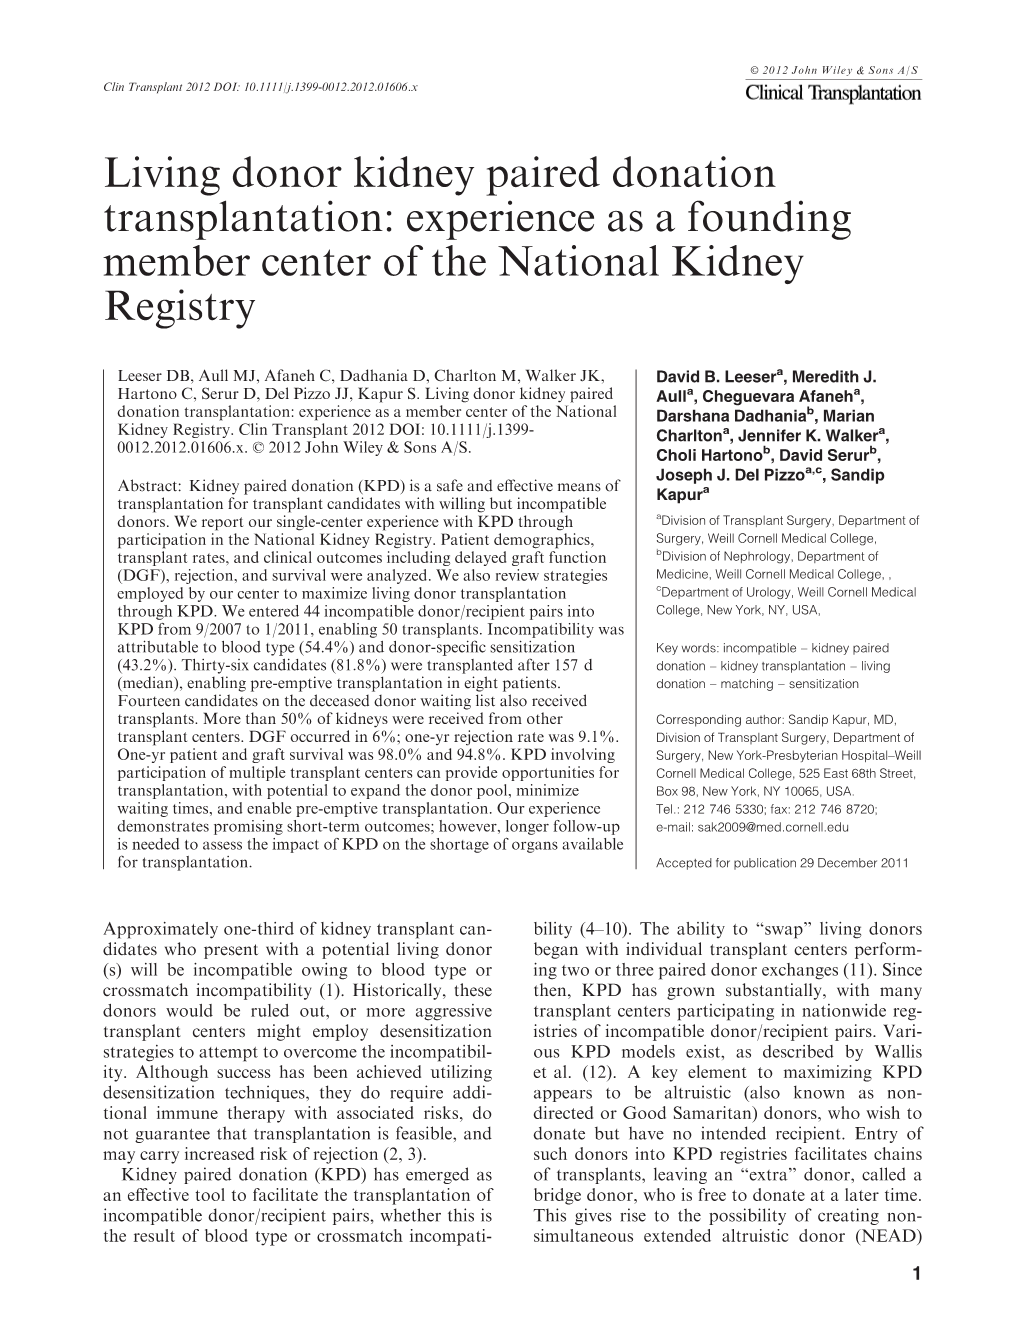 Living Donor Kidney Paired Donation Transplantation: Experience As a Founding Member Center of the National Kidney Registry